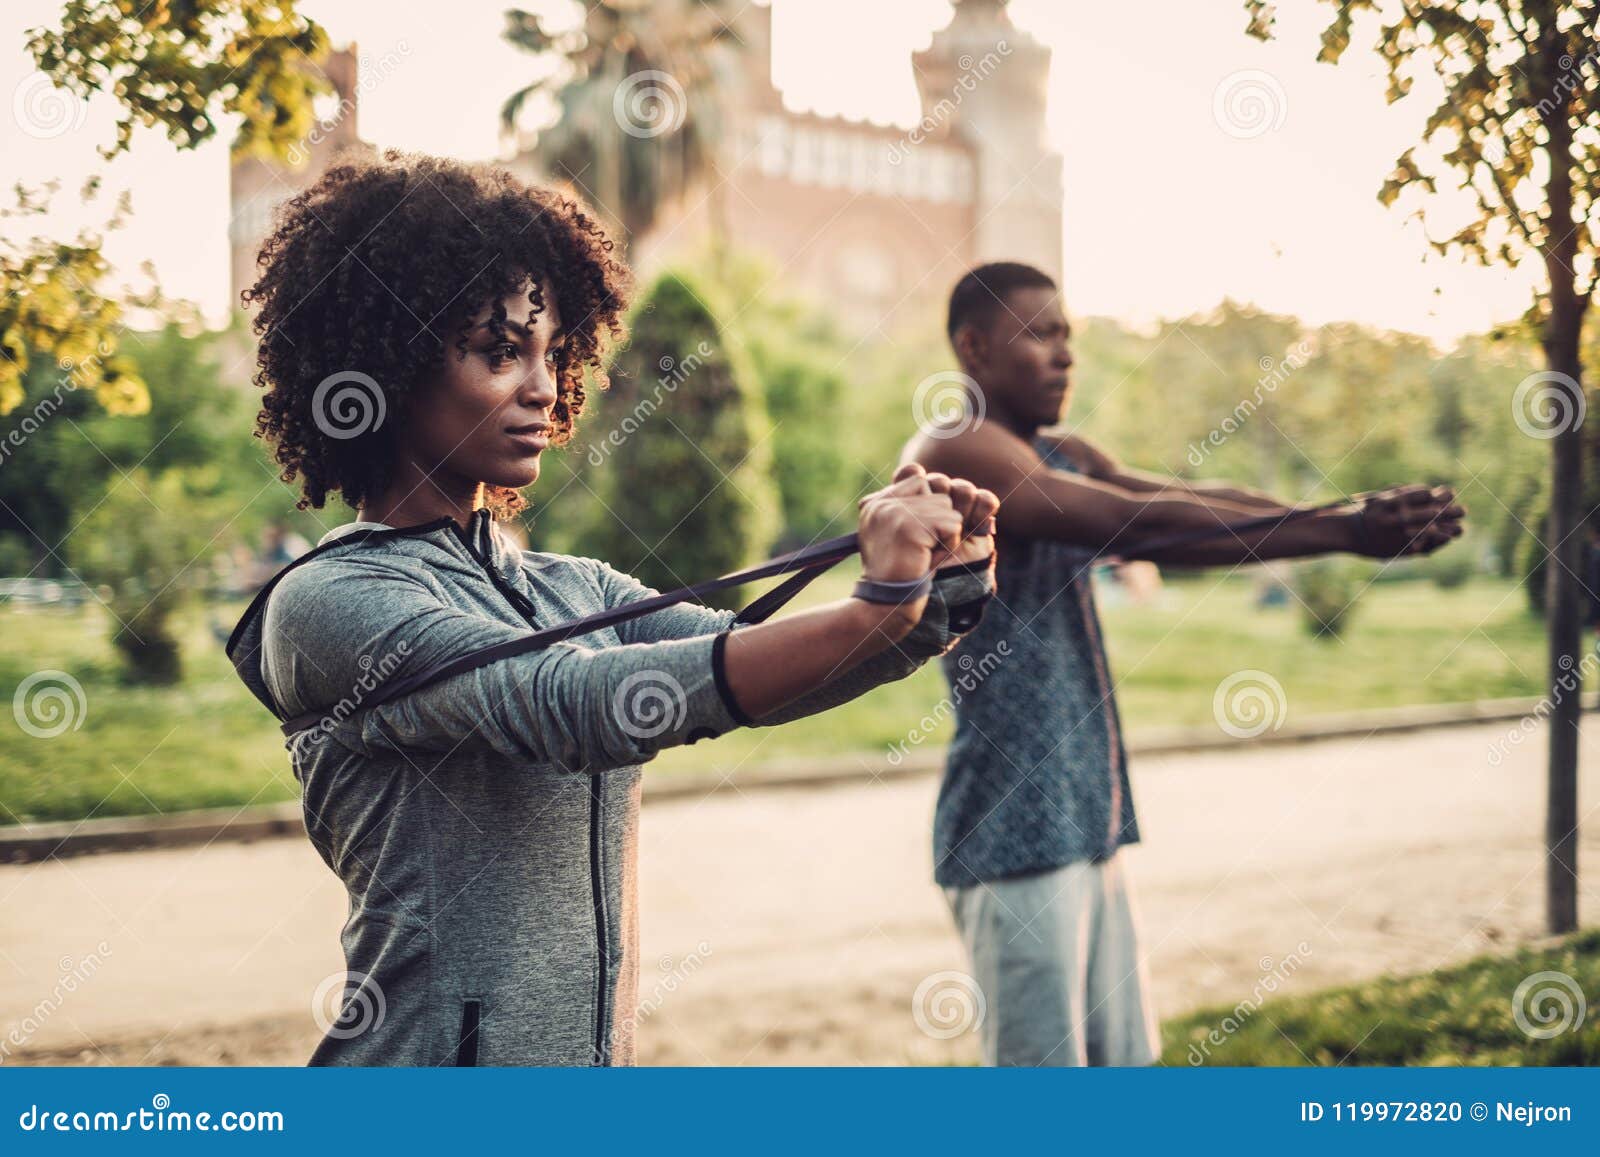 black couple doing exercise outdoors